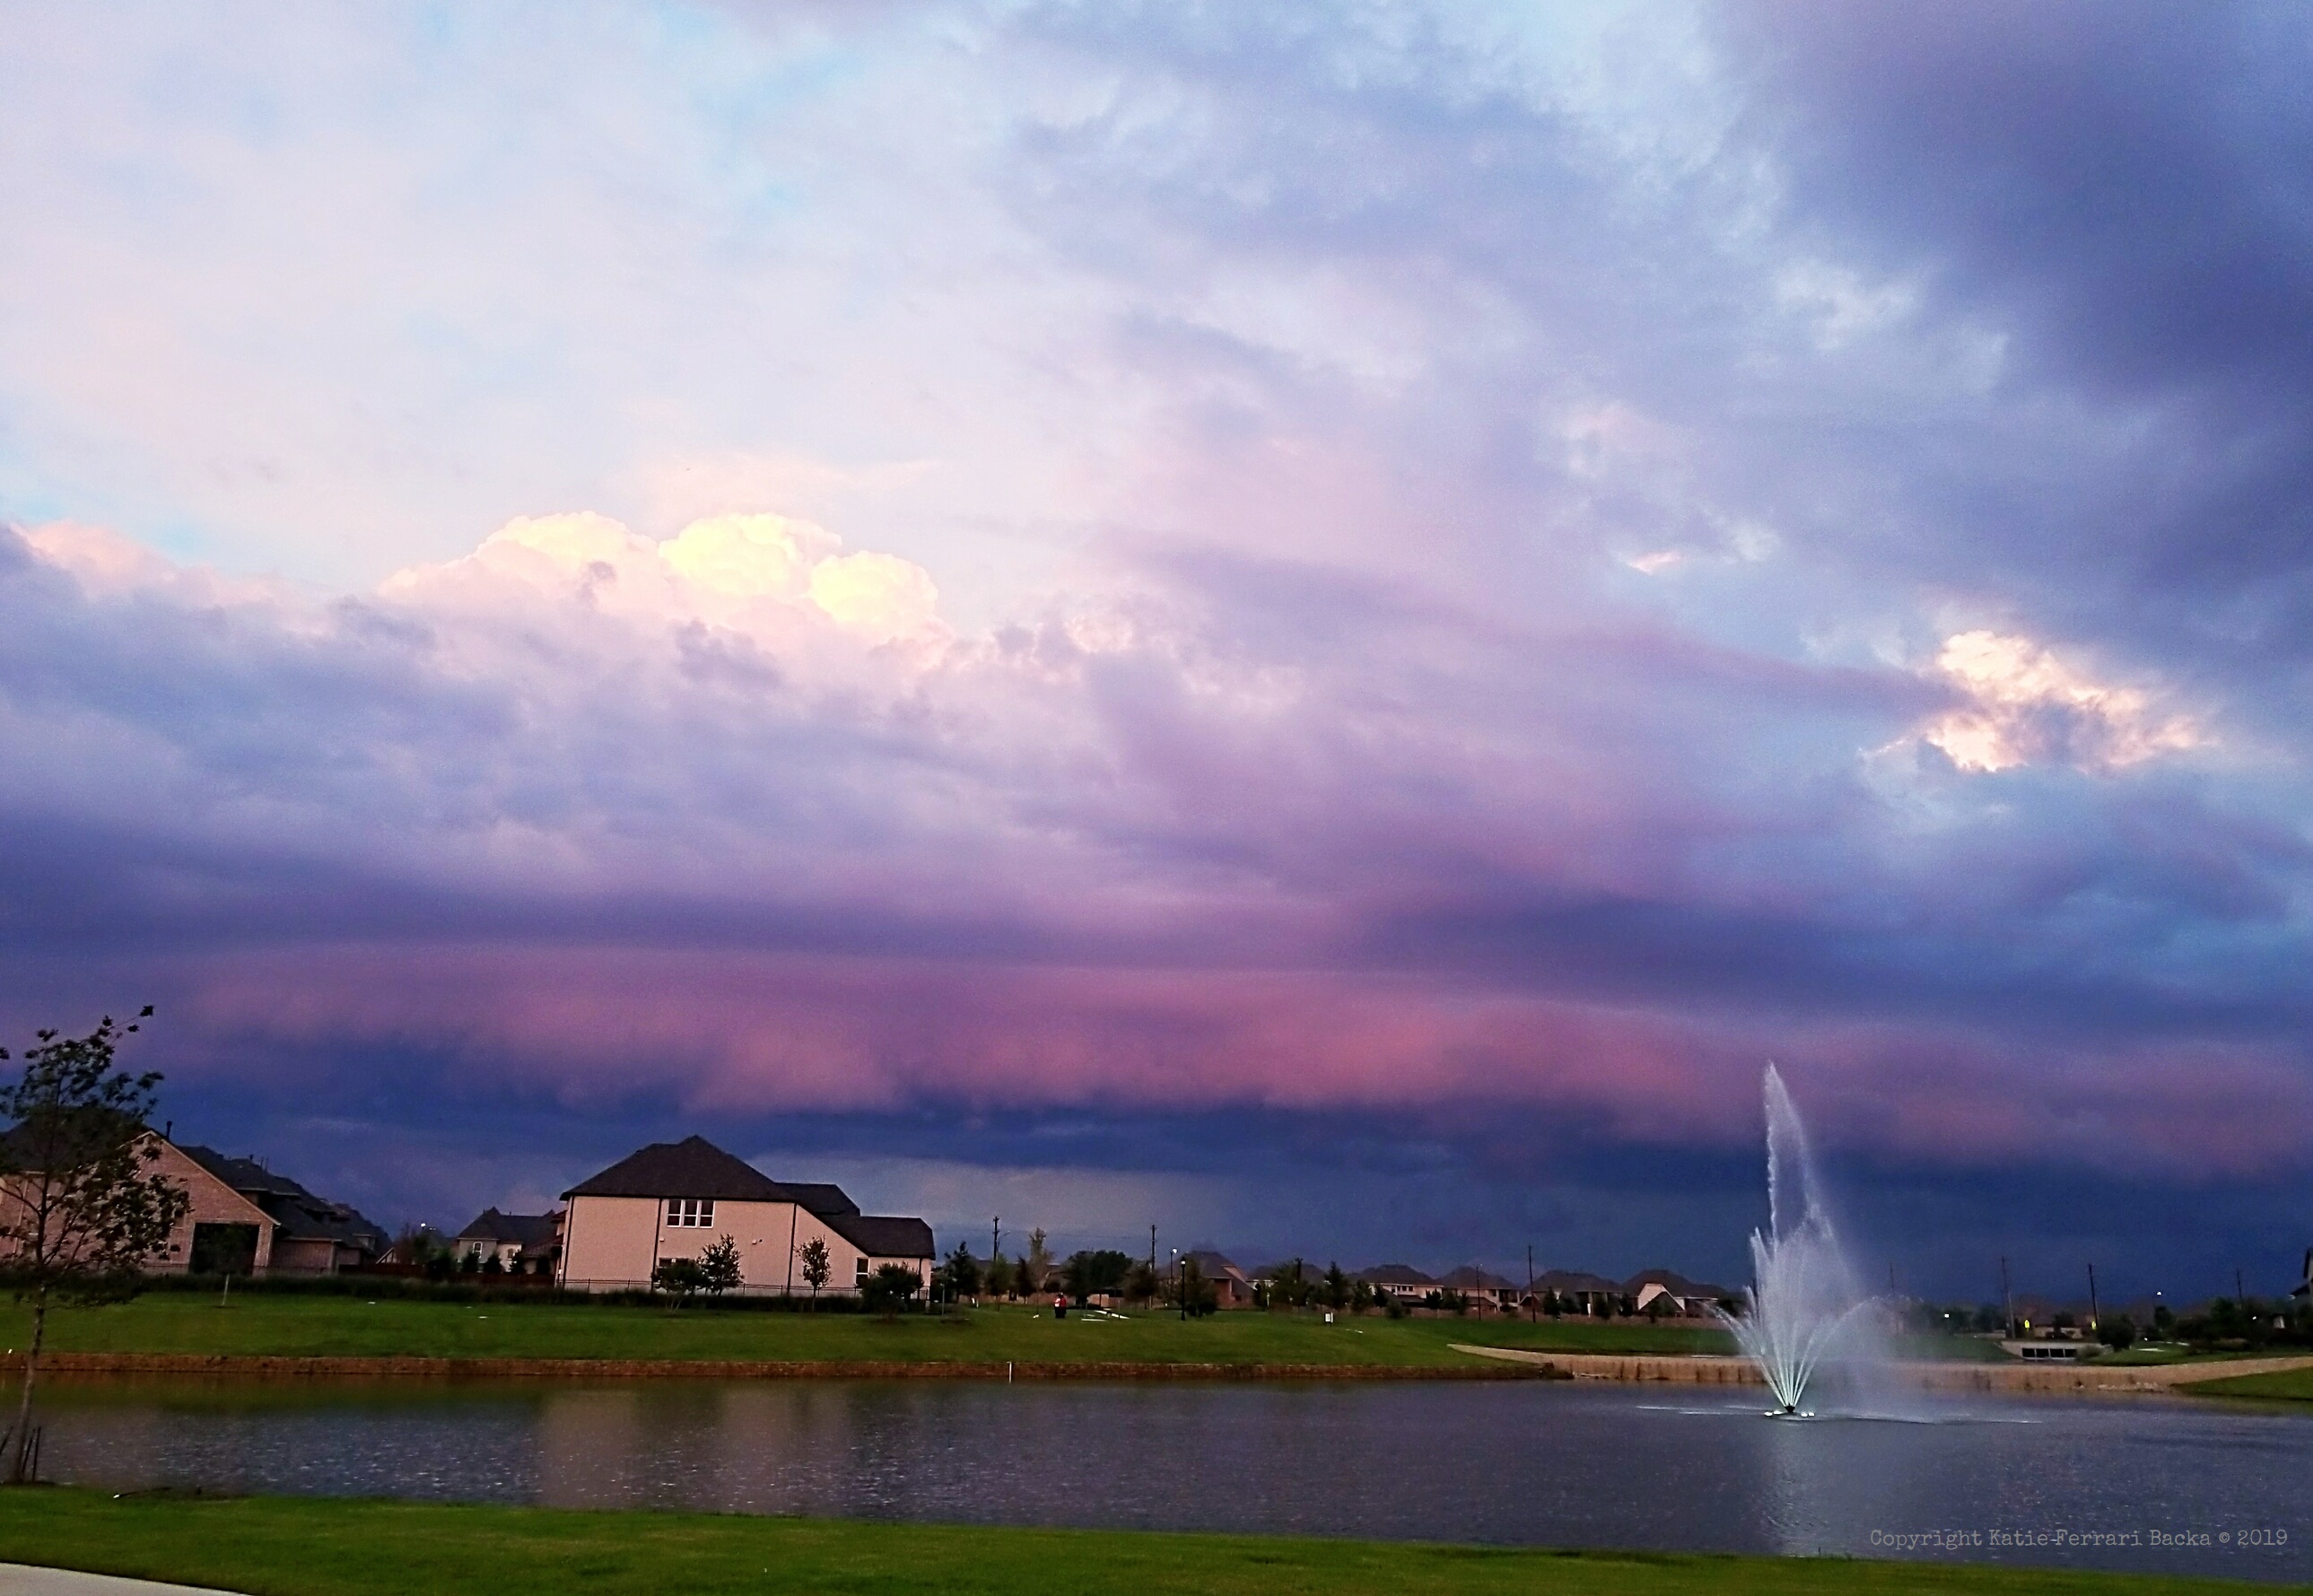 View of a storm coming in over a water fountain